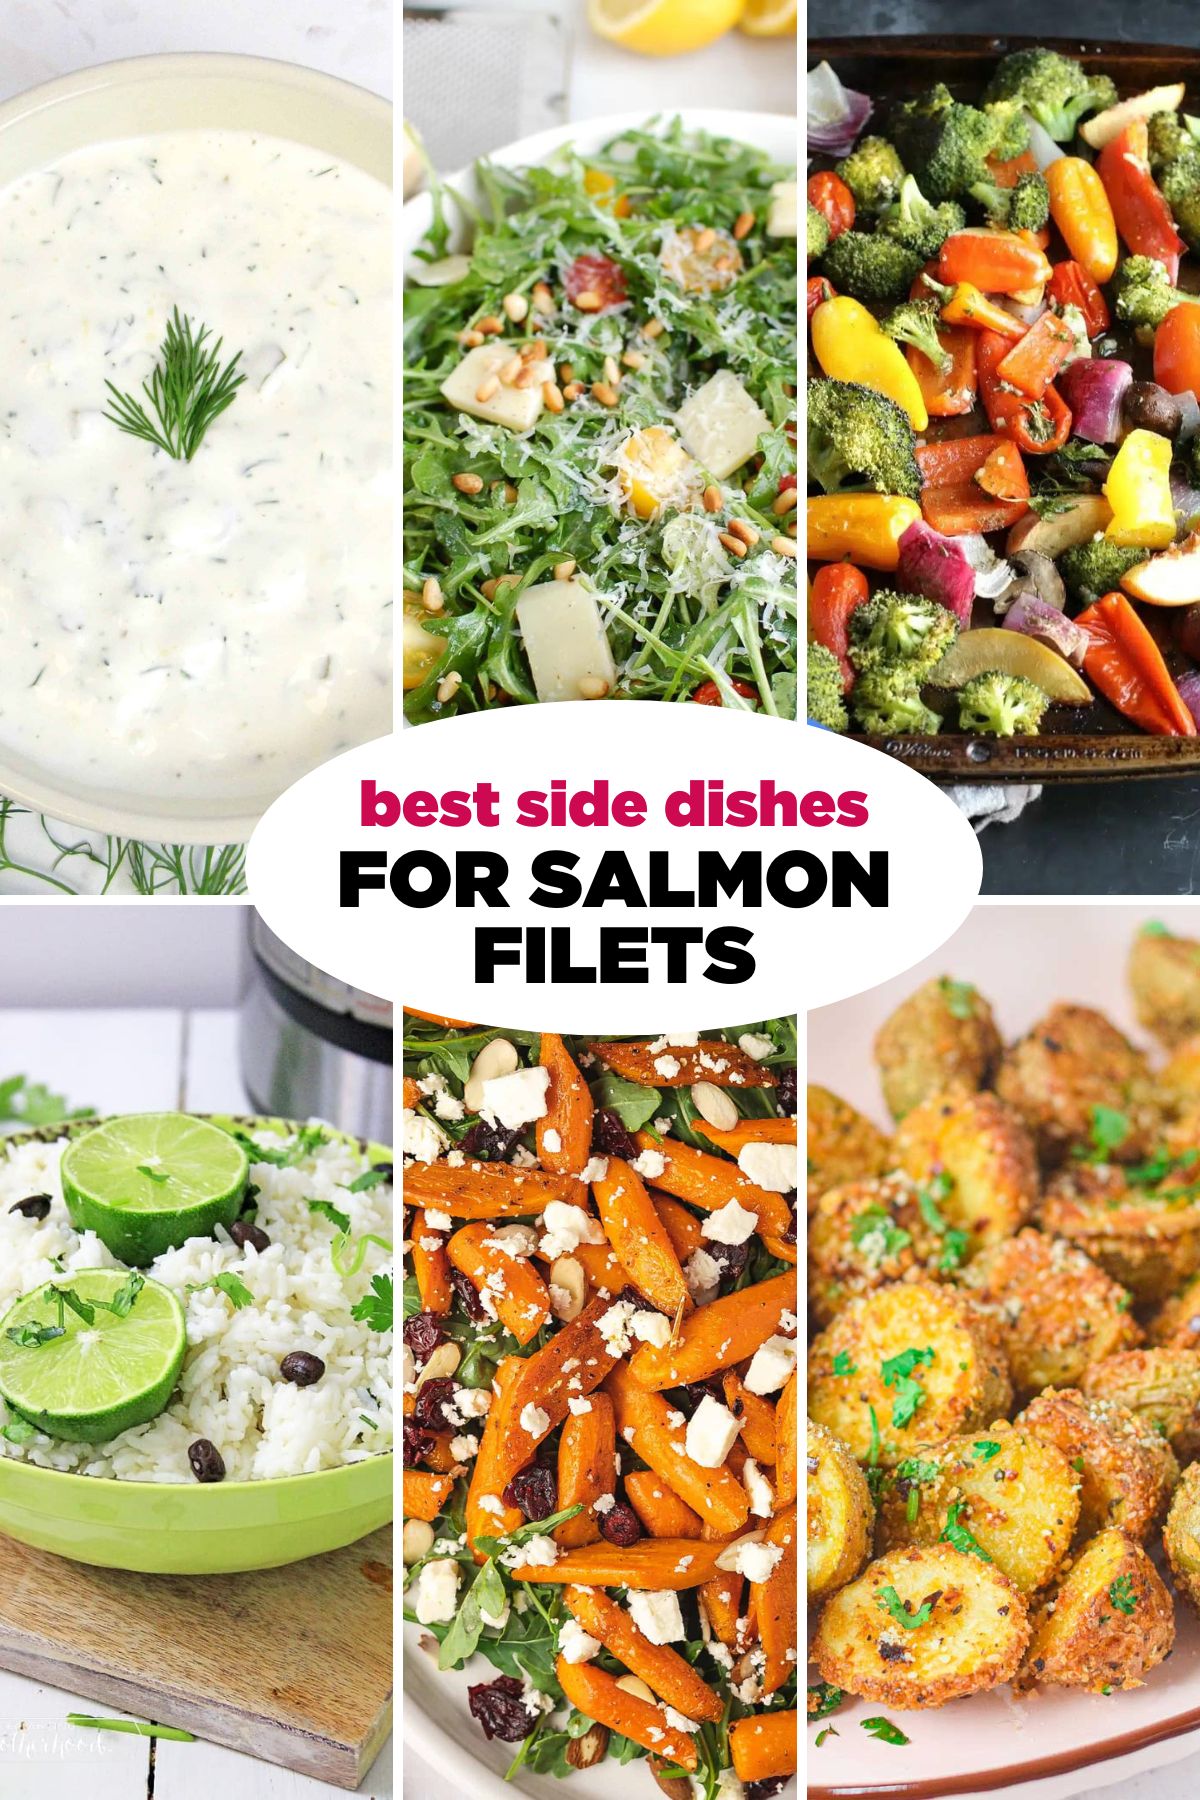 Four side dishes for salmon fillets.